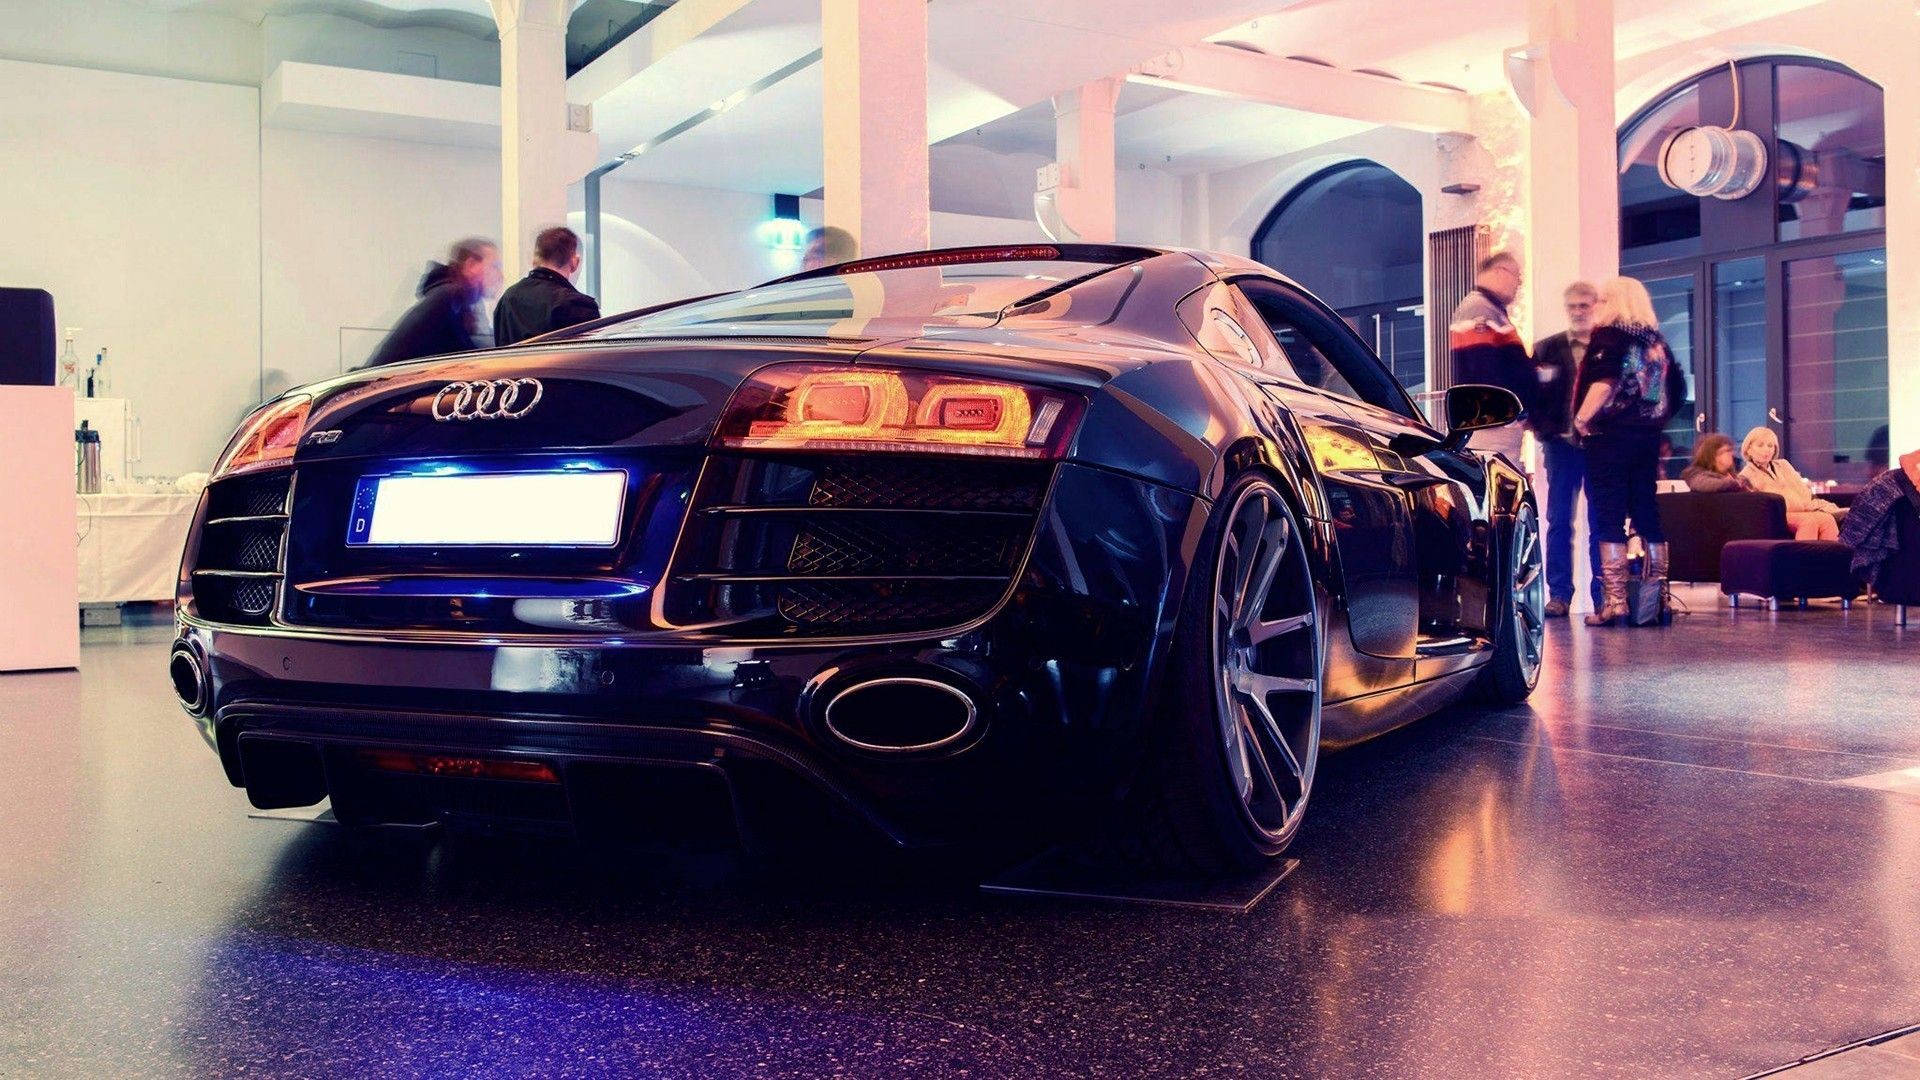 The Audi R8 is standing in a car dealership